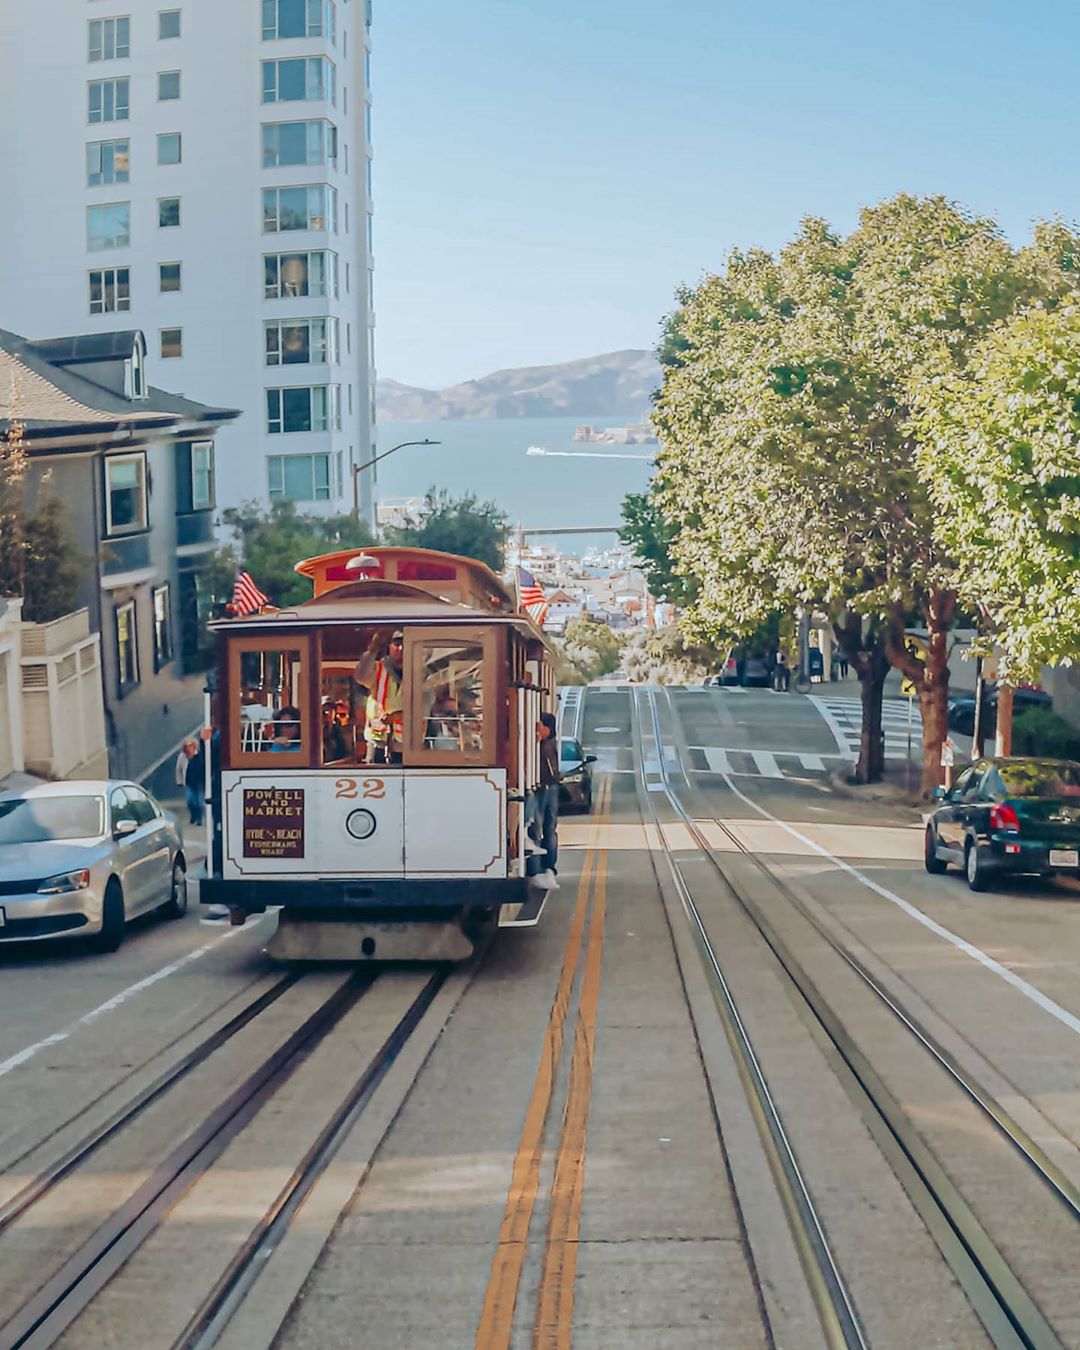 Street Trolley Going Up the Hill in San Francisco, CA. Photo by Instagram user @the_life_of_purple_rose